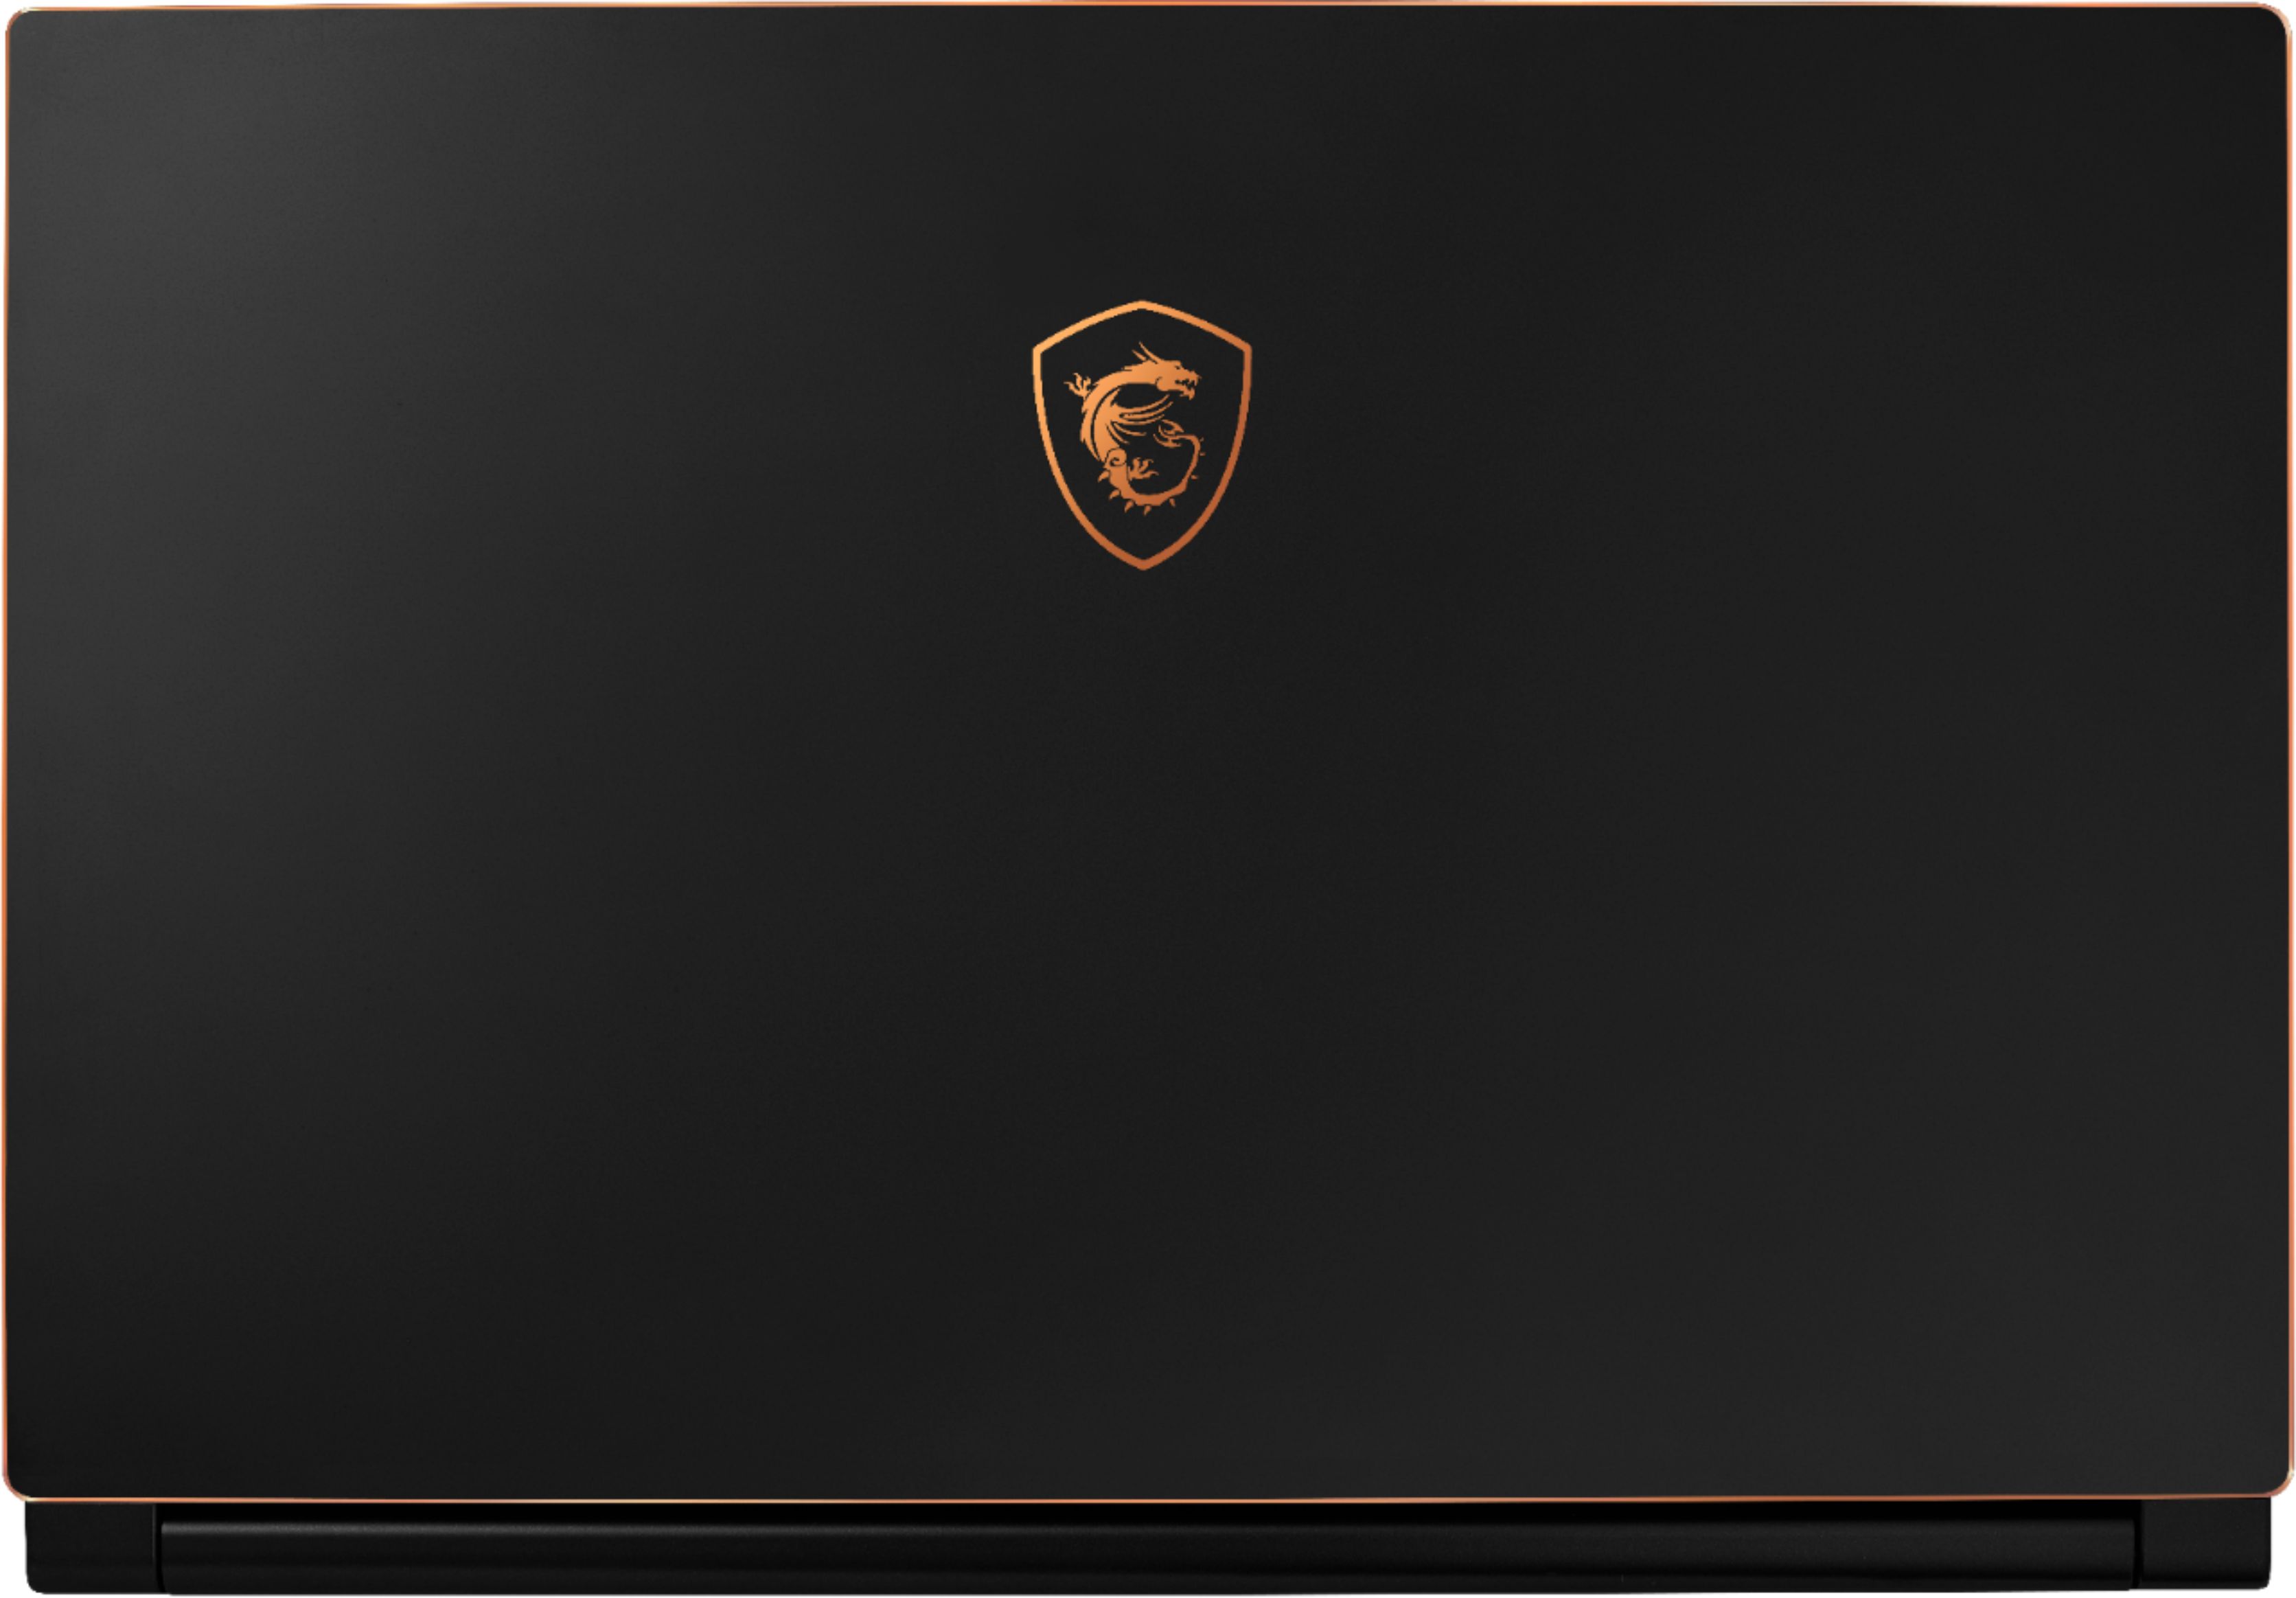 Best Buy: MSI 15.6 Gaming Laptop Intel Core i7 16GB Memory NVIDIA GeForce  GTX 1070 512GB Solid State Drive Matte Black With Gold Diamond Cut GS65  STEALTH THIN-037